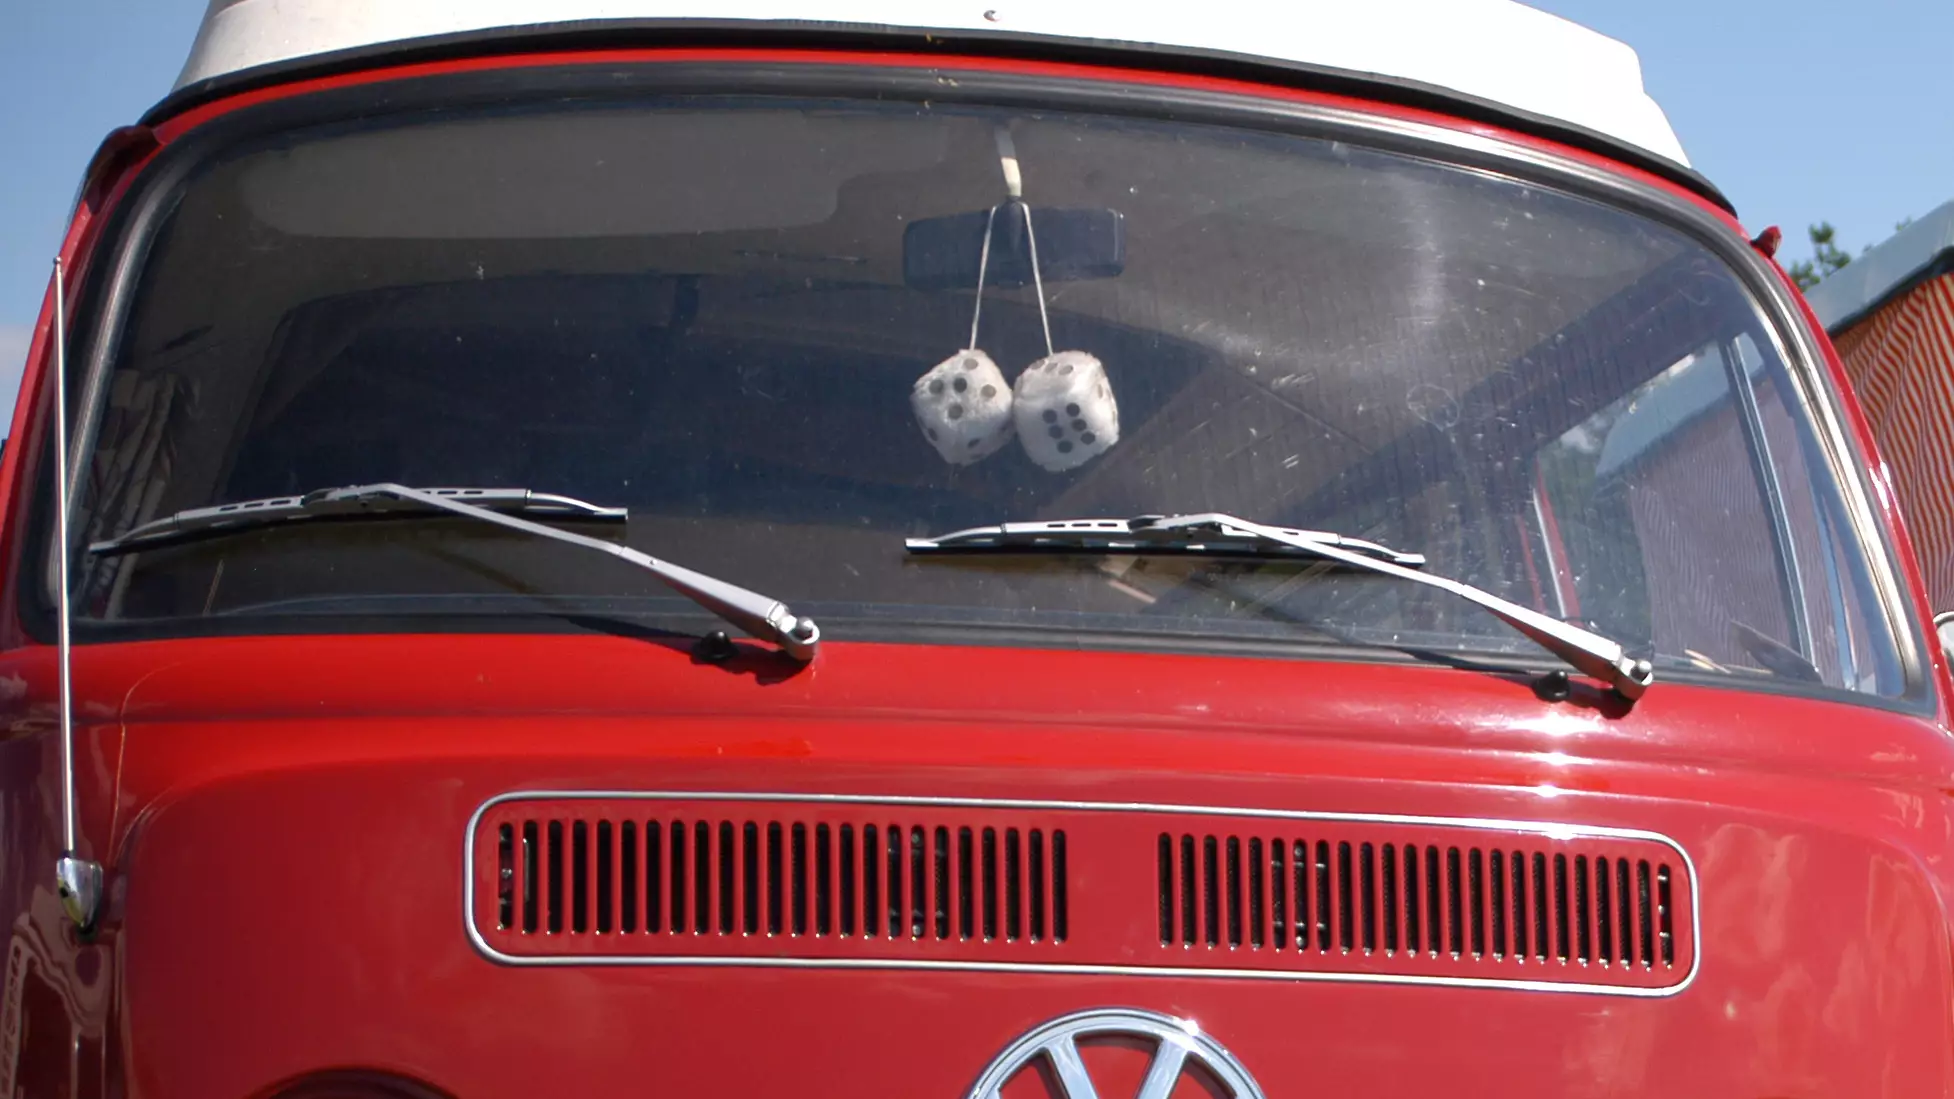 Aussie Drivers Can Cop A $344 Fine If You Have Fluffy Dice Or Air Freshener In Car